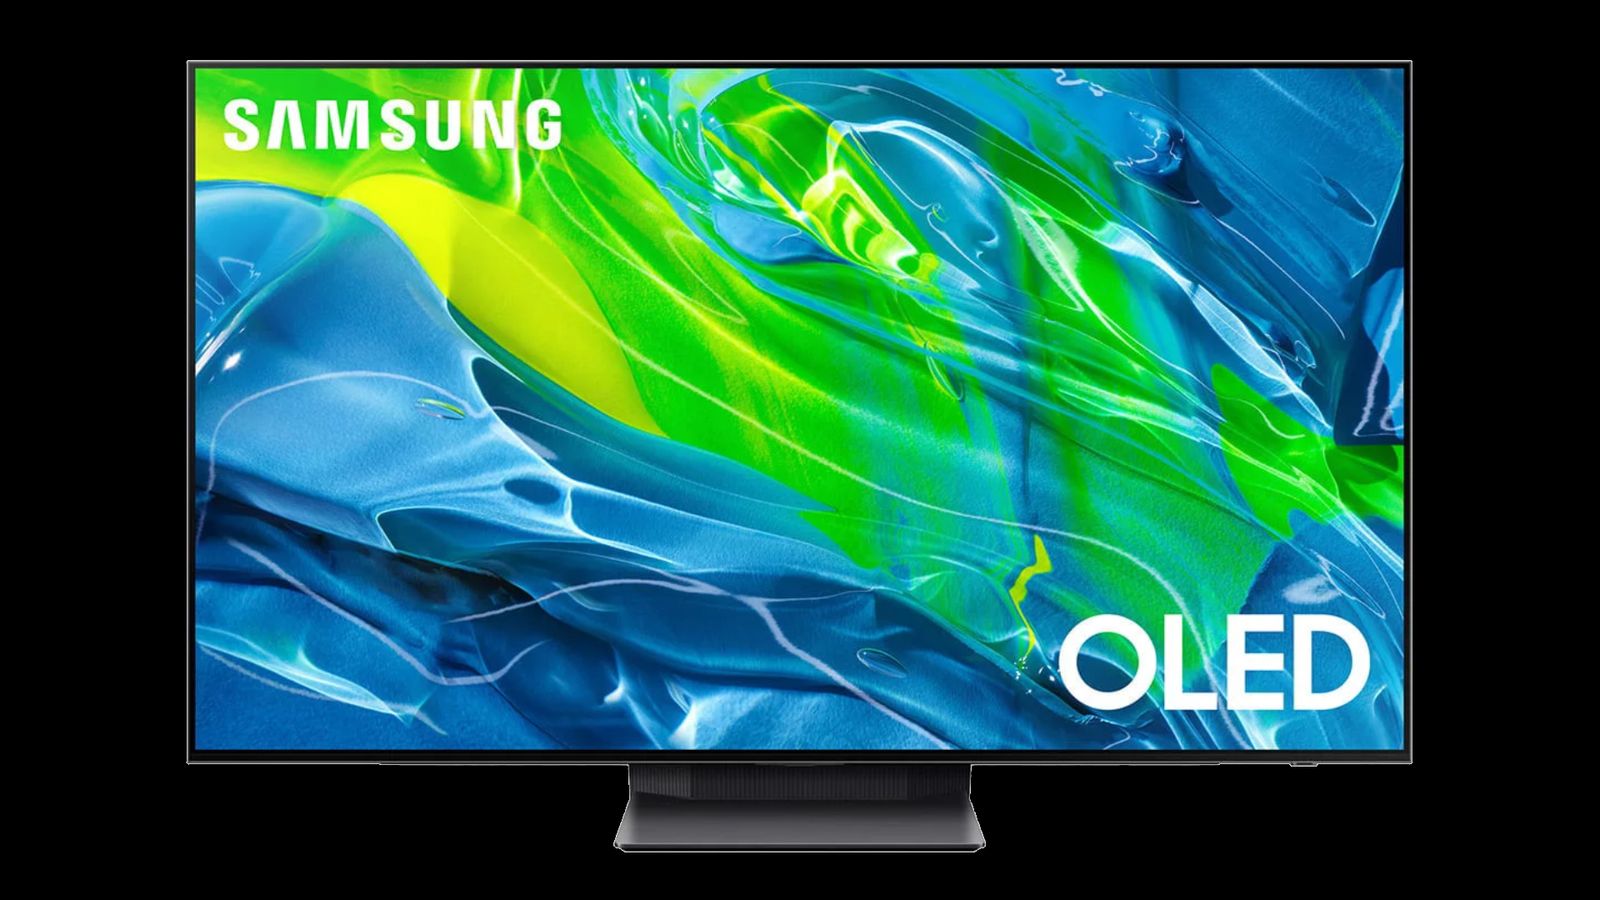 Samsung S95B product of a black near-frameless TV with a blue and green watery pattern on the display.